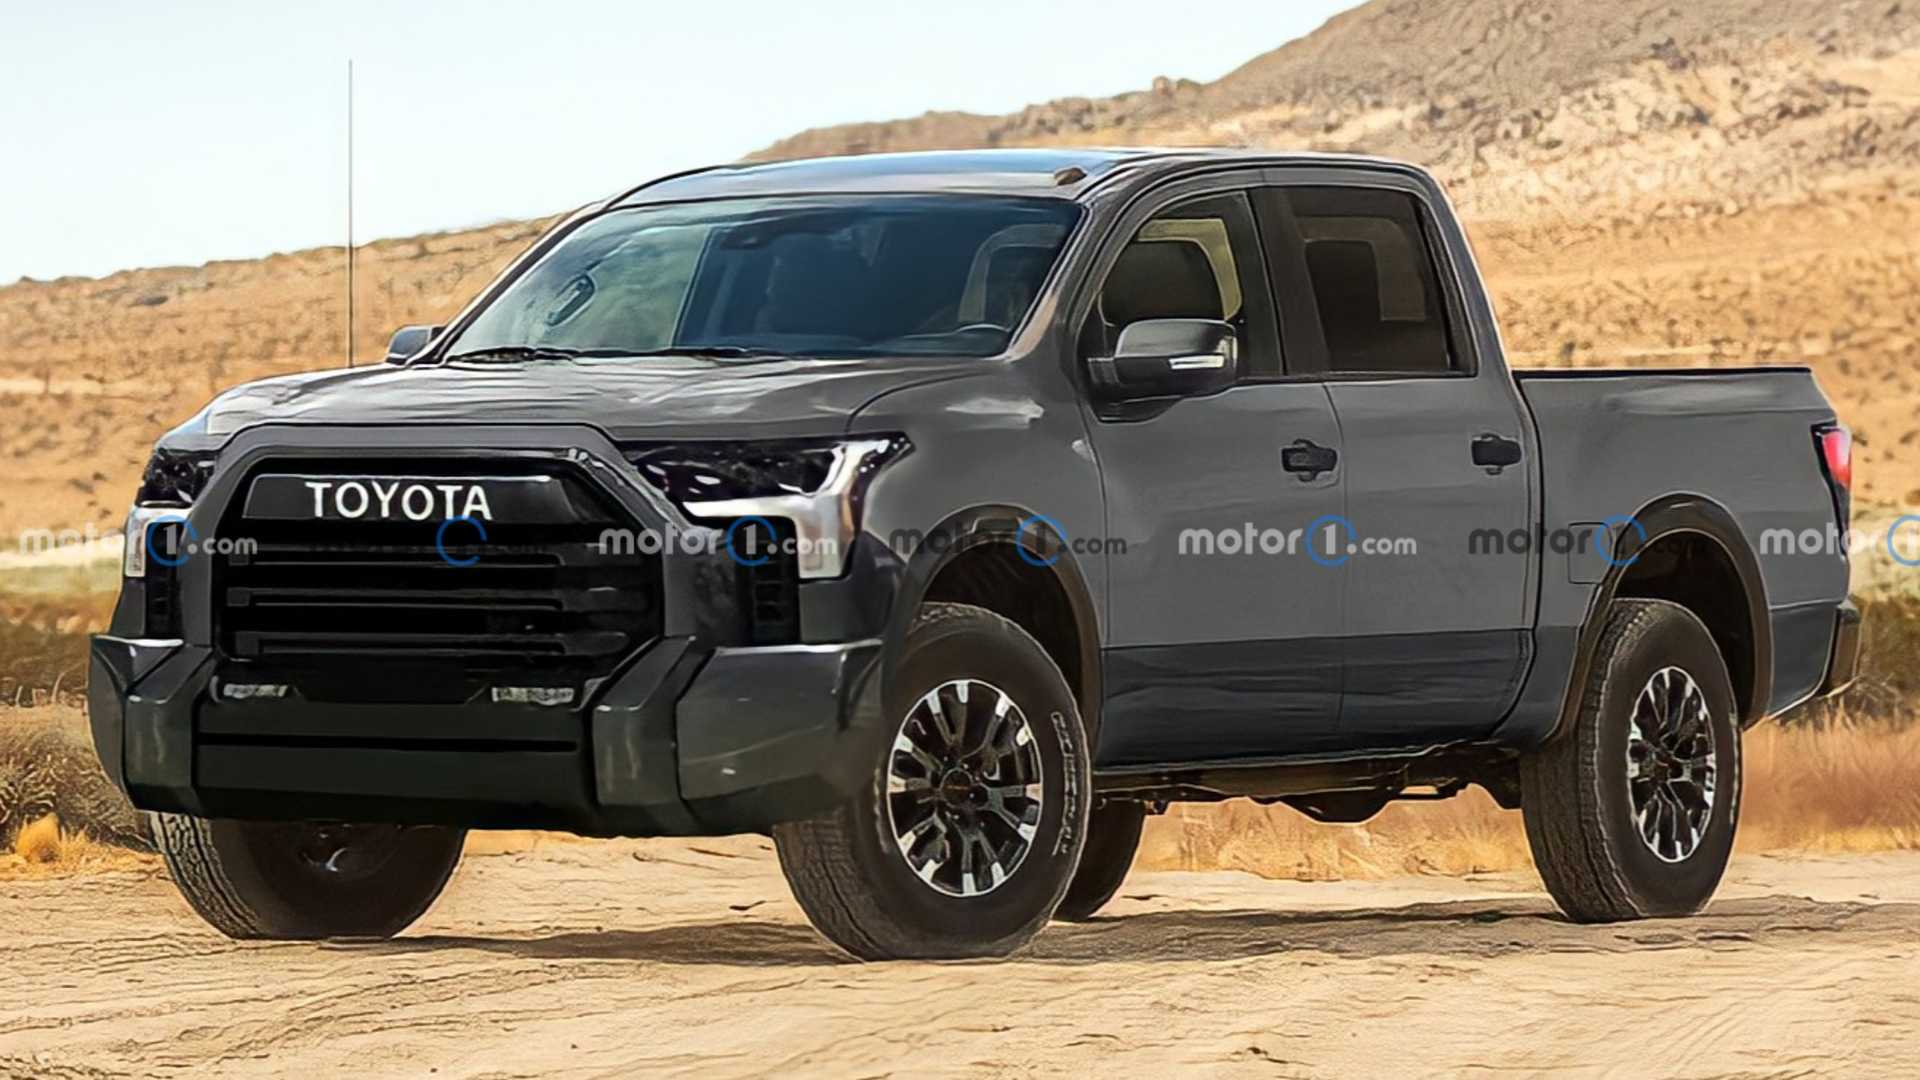 2022 Toyota Tundra Rendered After Leaked Image, New Video ...